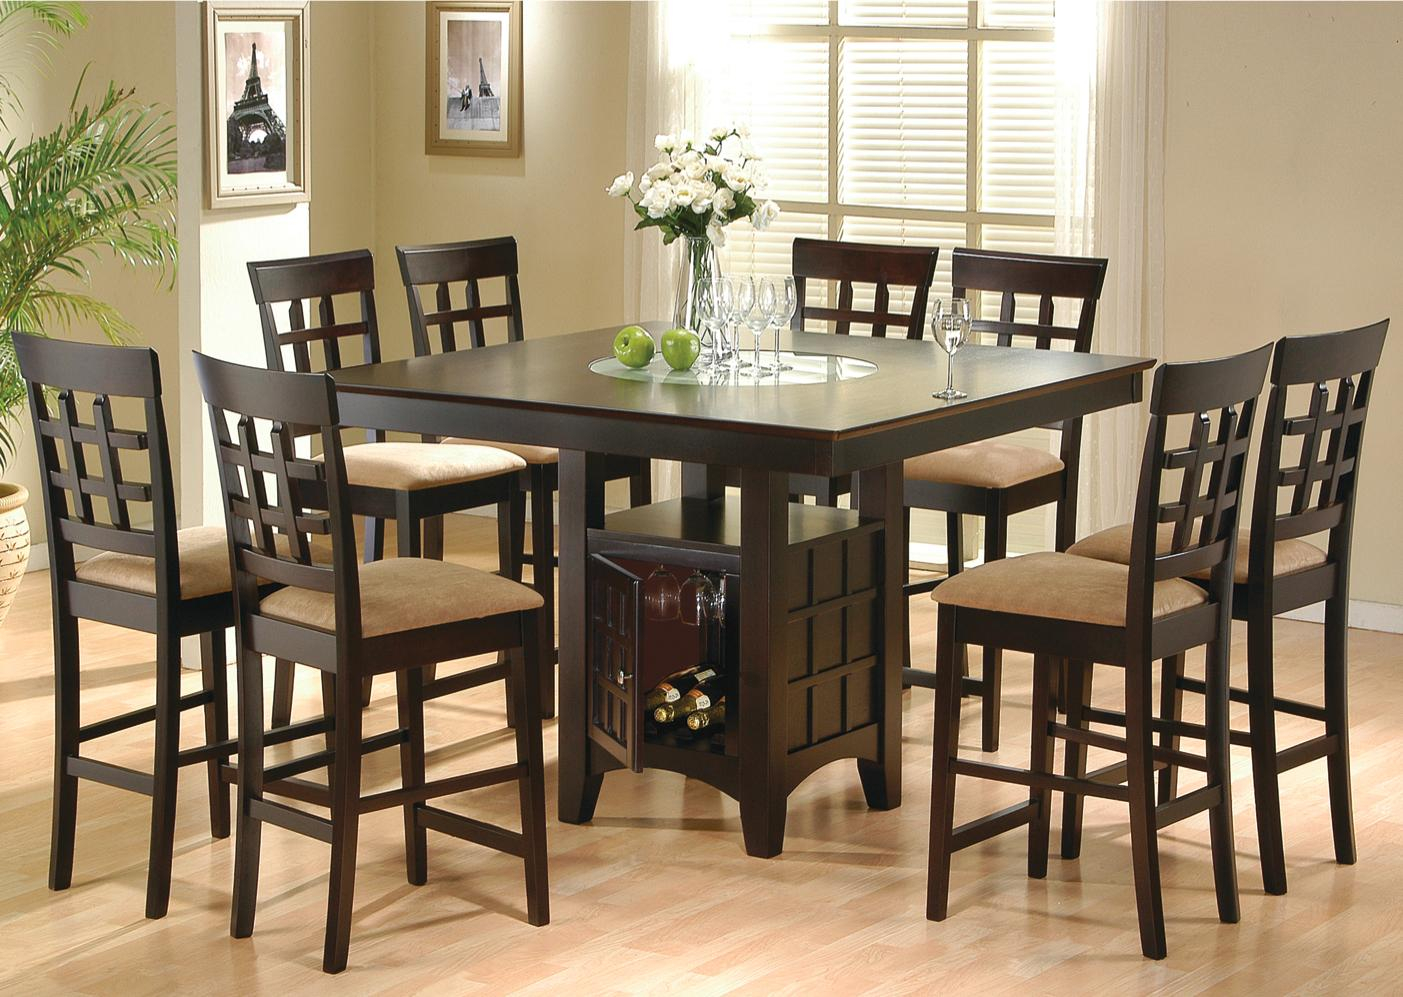 Mix And Match Dining Room Sets